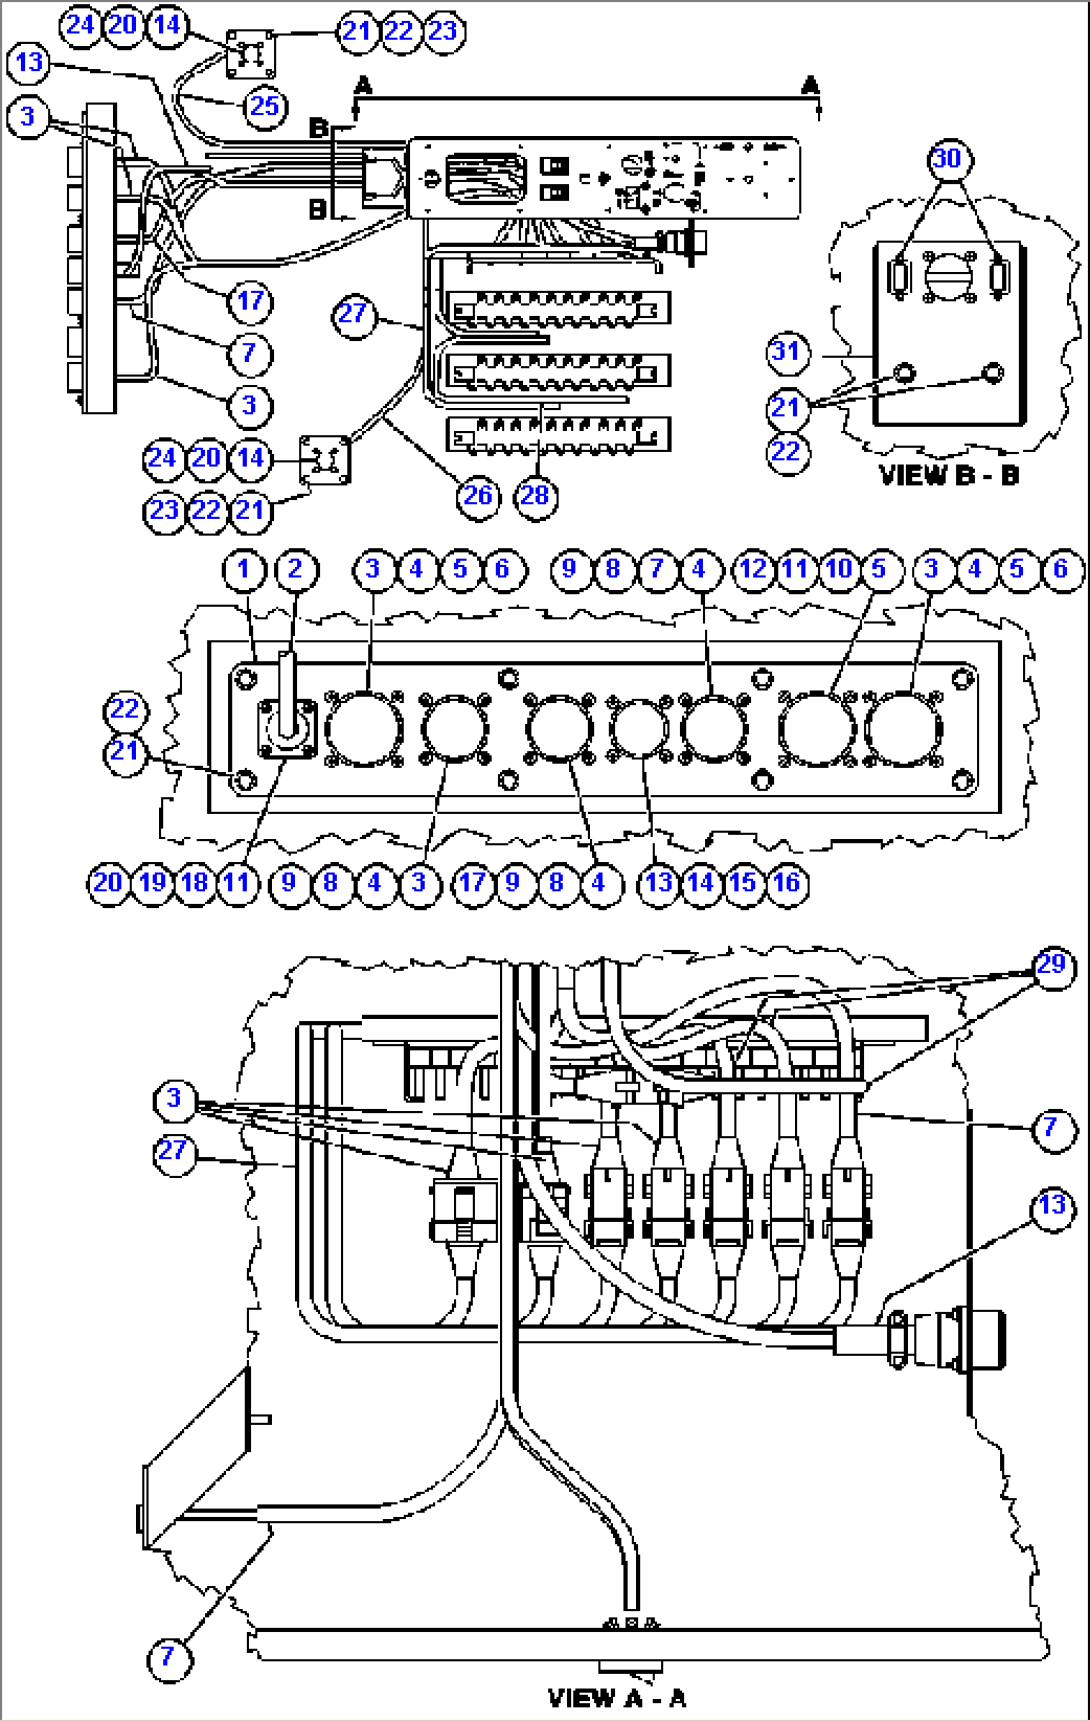 CAB CONNECTOR PLATE & WIRING